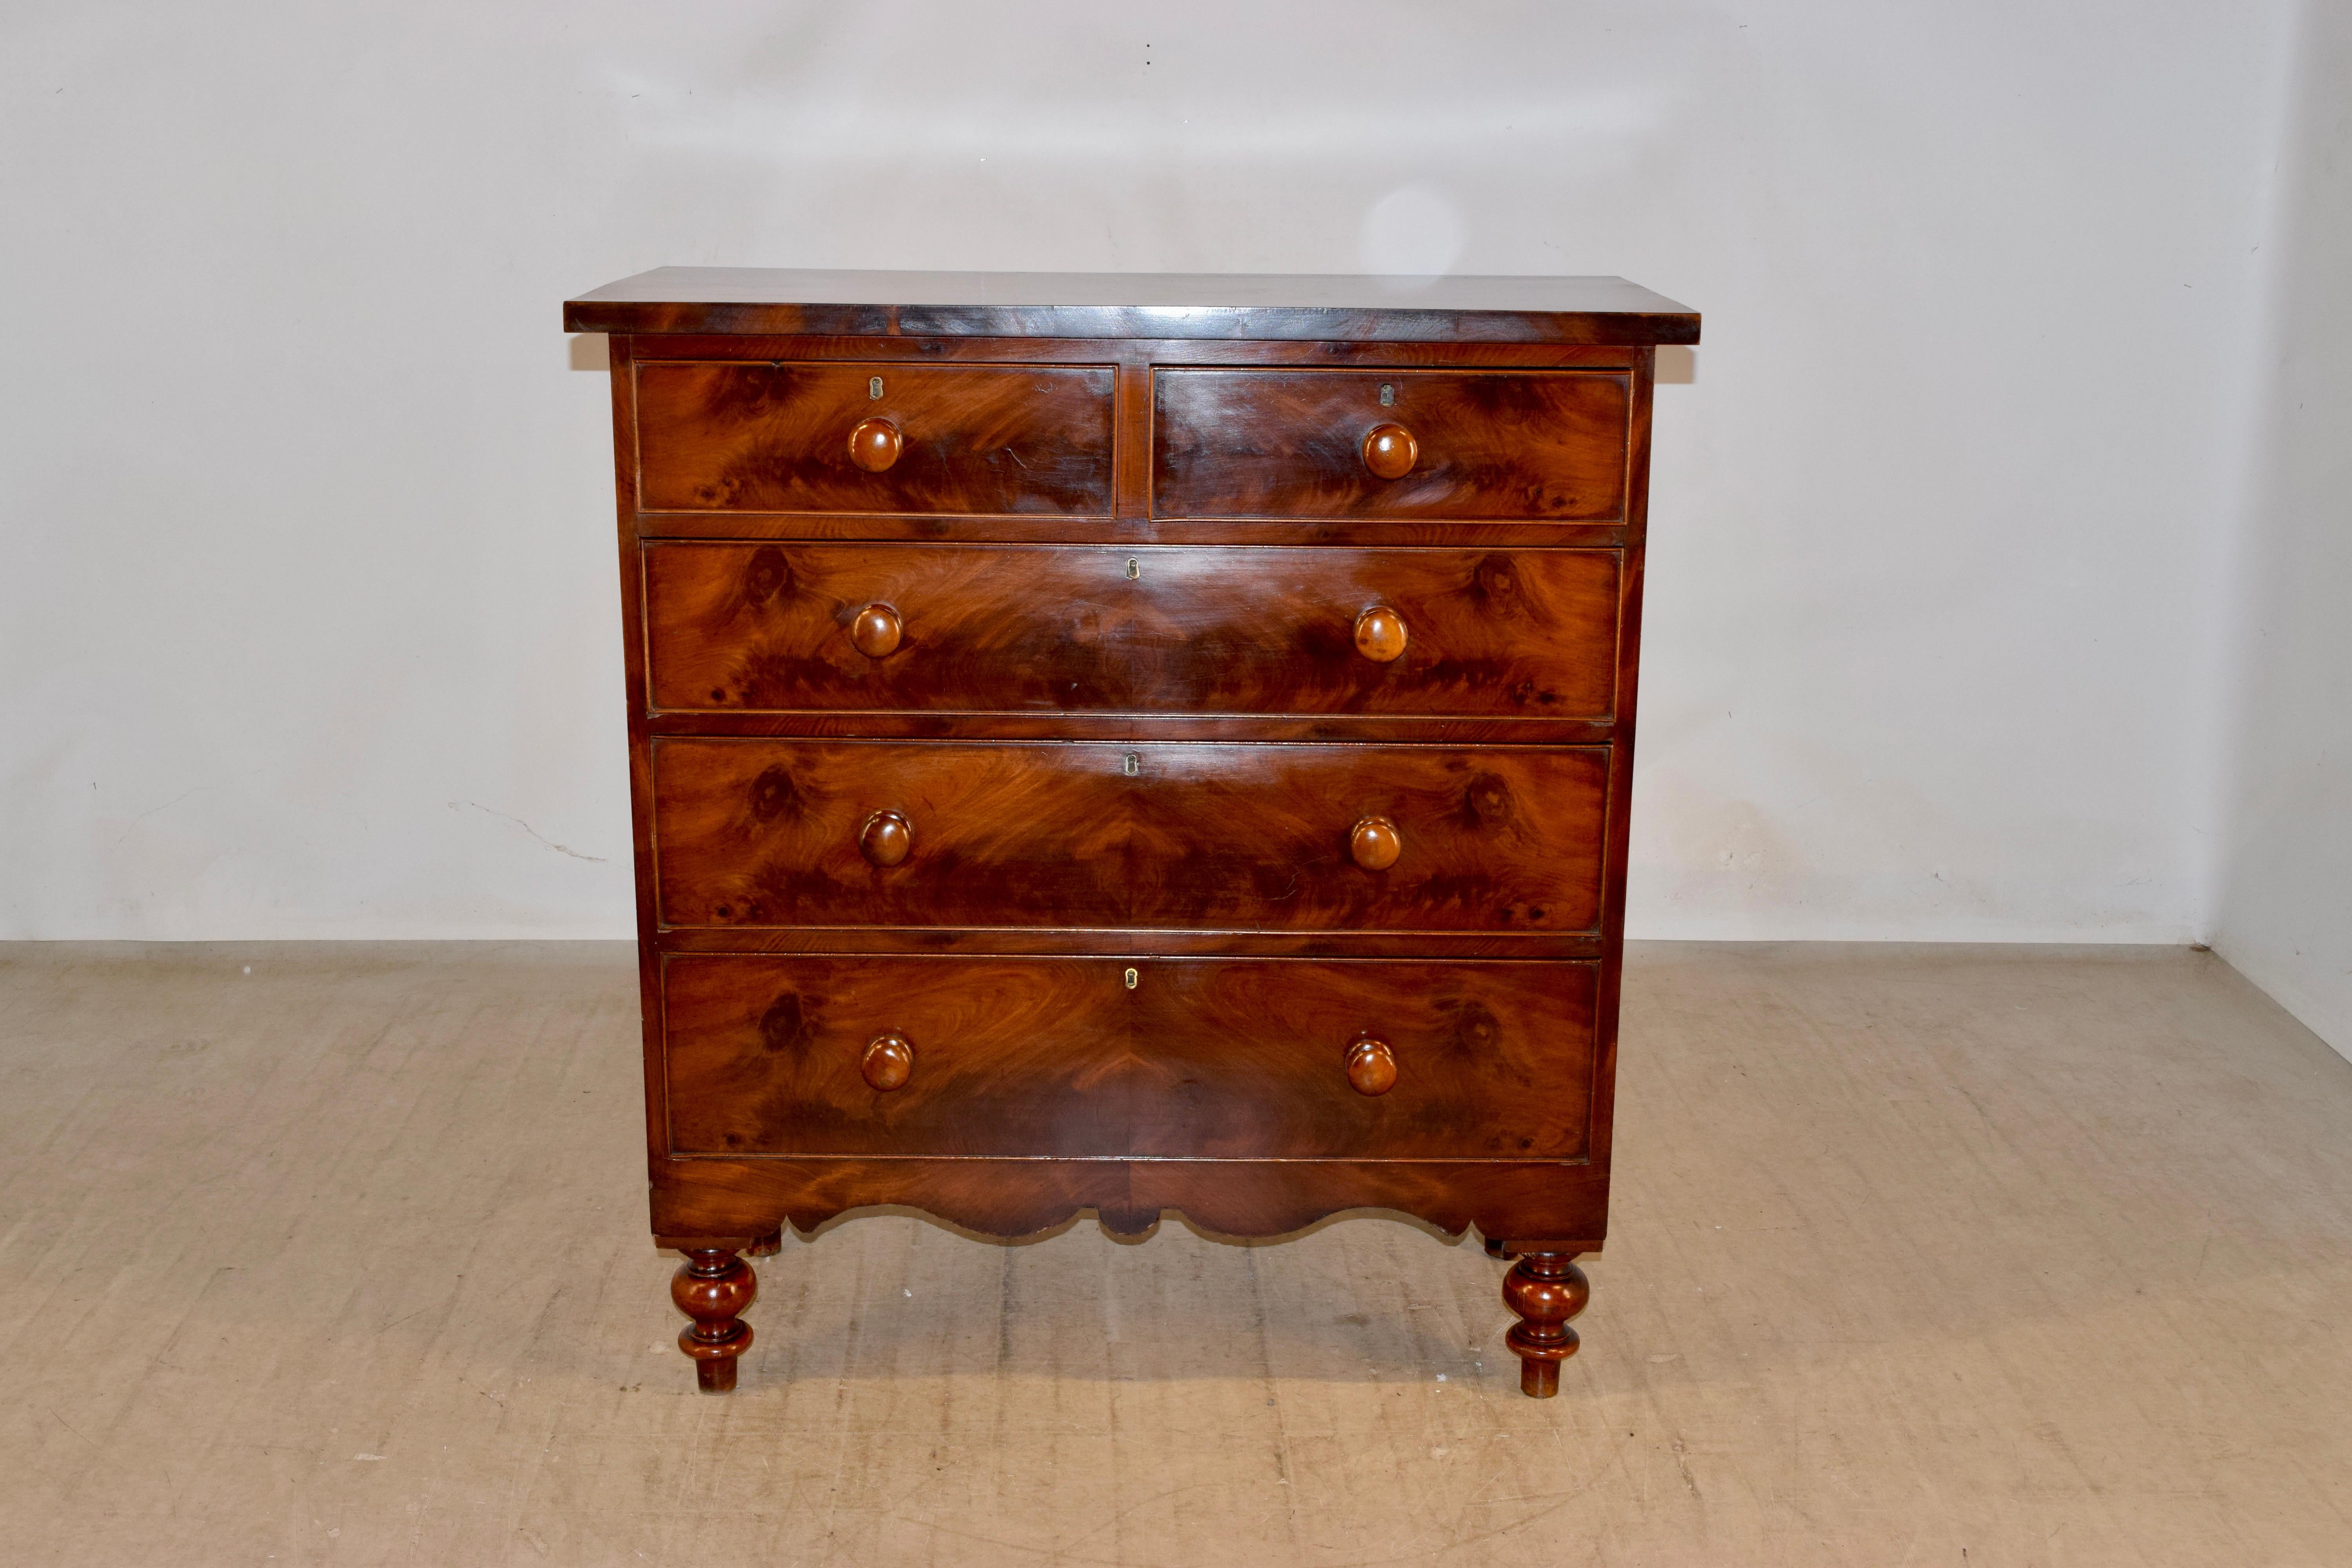 19th century mahogany chest of drawers form England with a wonderfully grained top and front. There are two over three drawers, all with wonderfully grained drawer fronts. There is a lower apron which is hand scalloped and the case is raised on hand